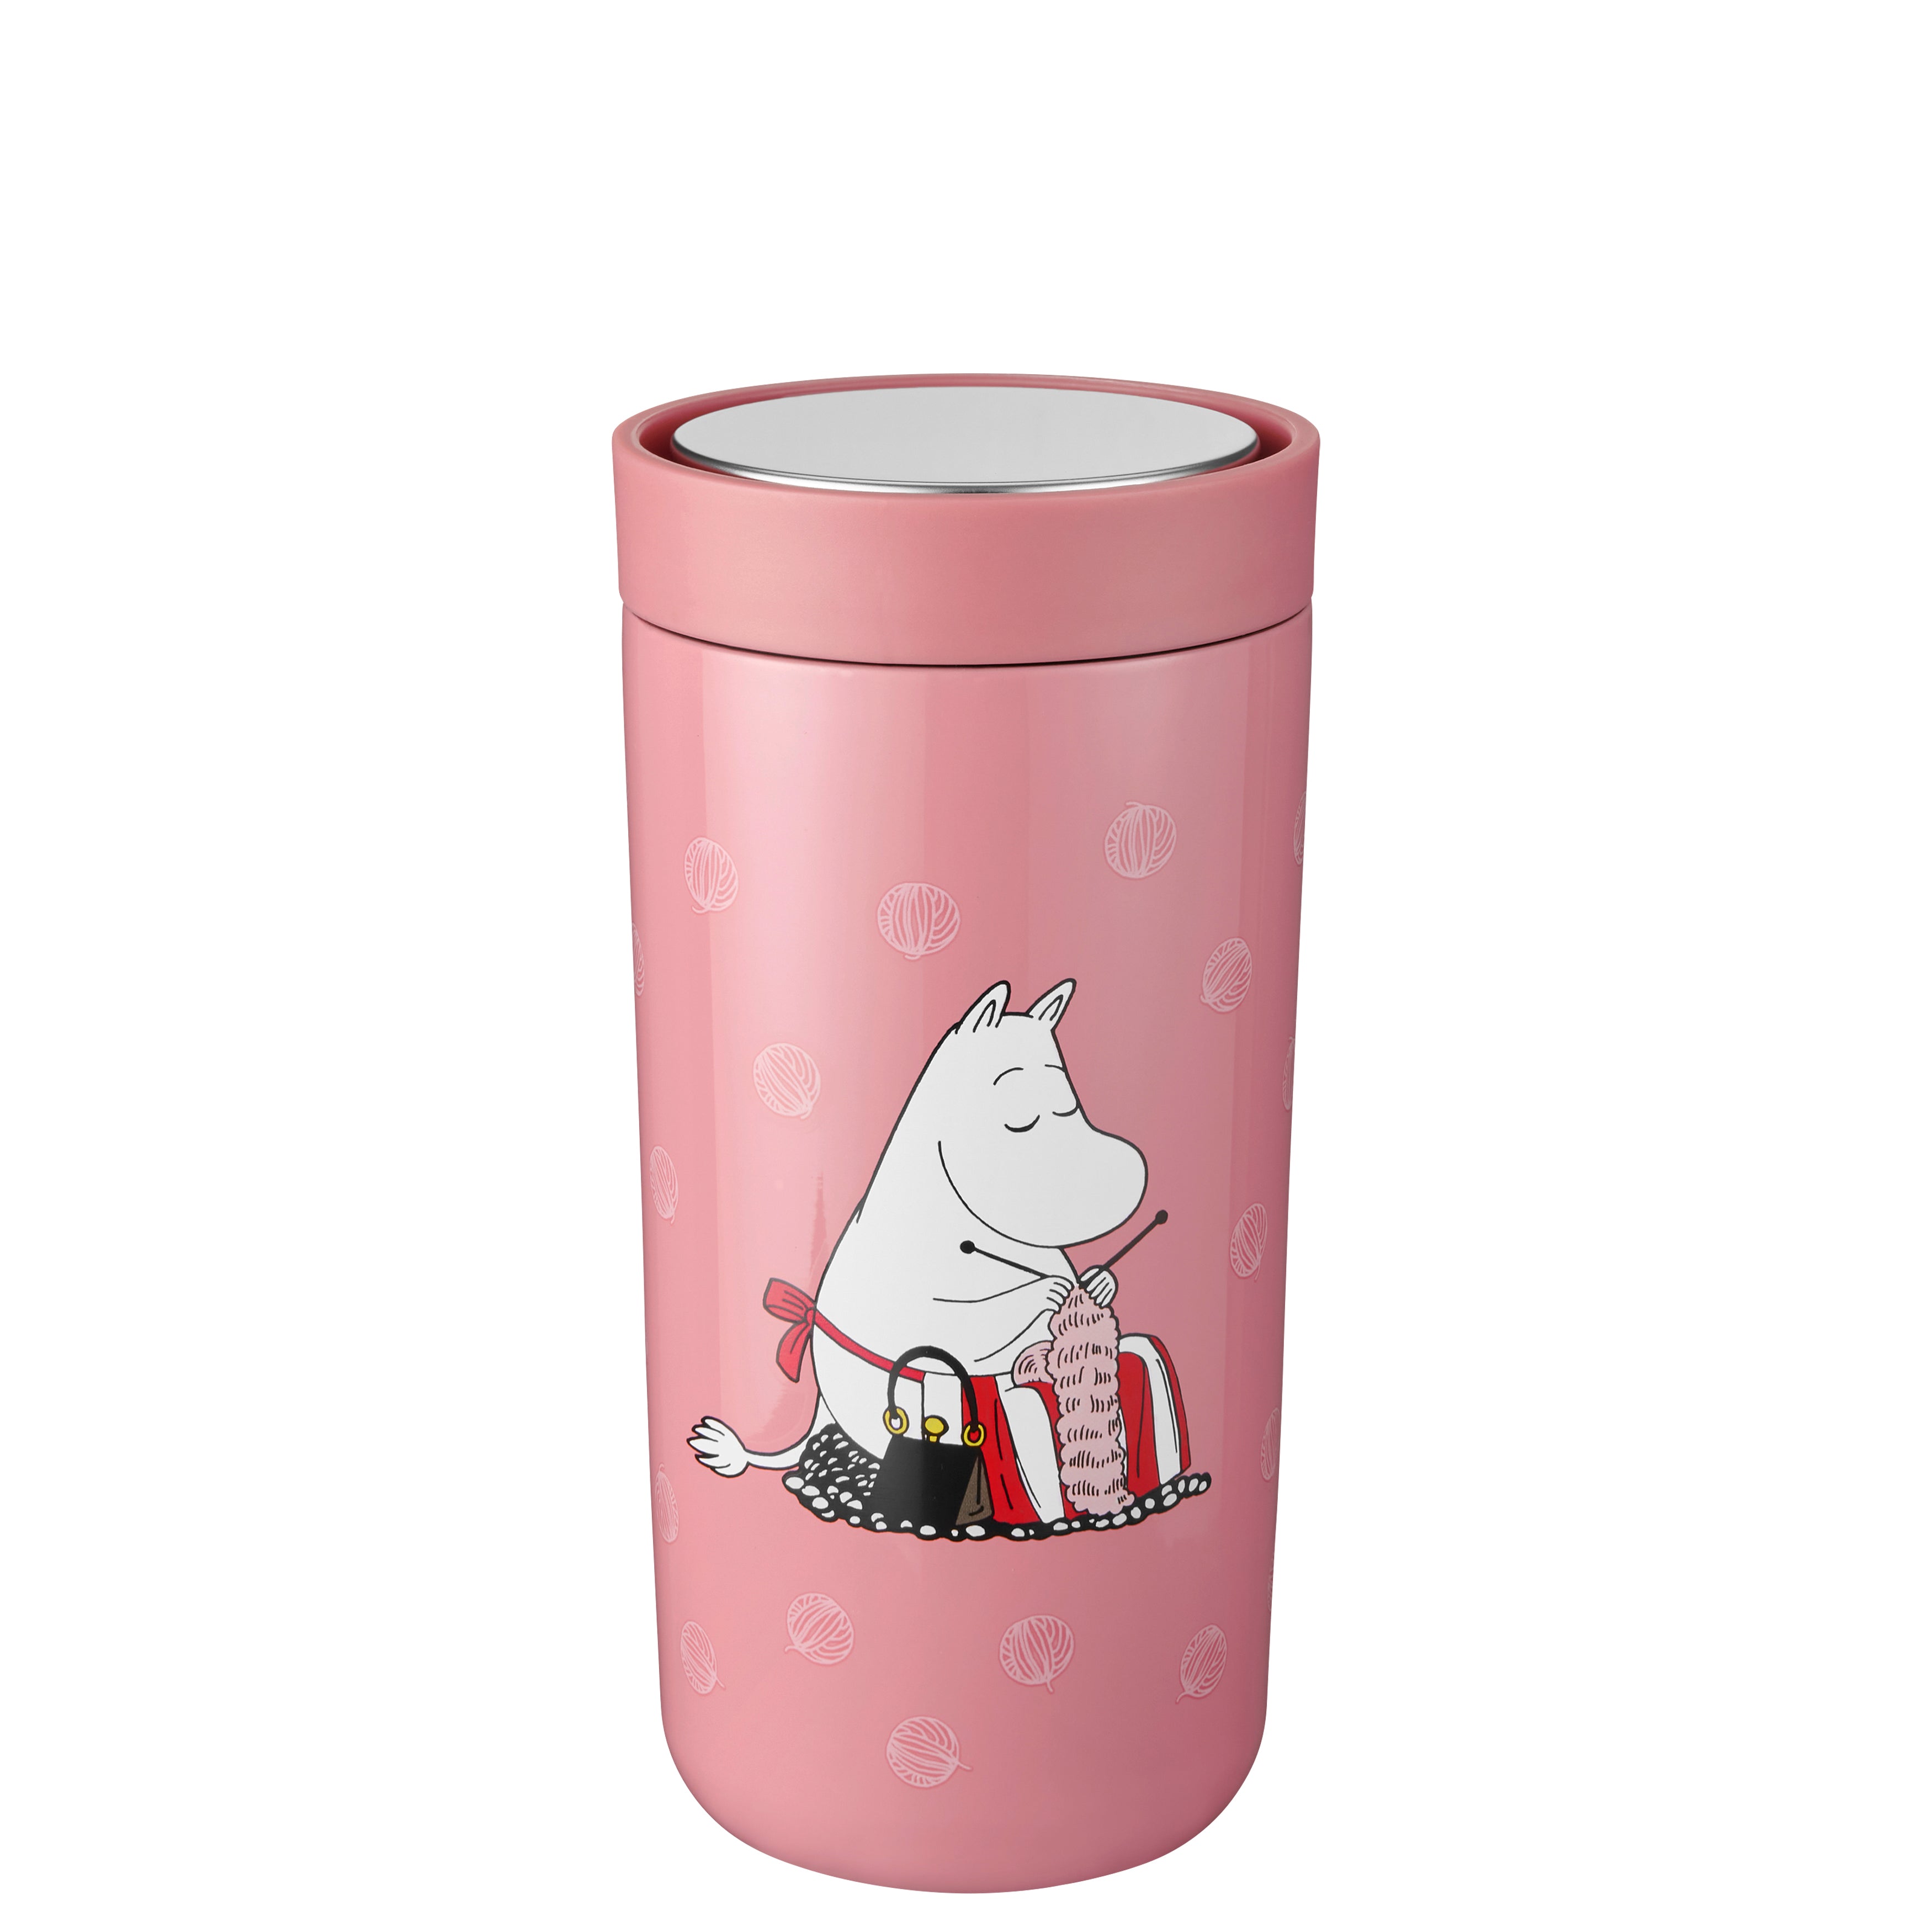 To Go Click d. steel, 0.4 l. -Moomin knitting